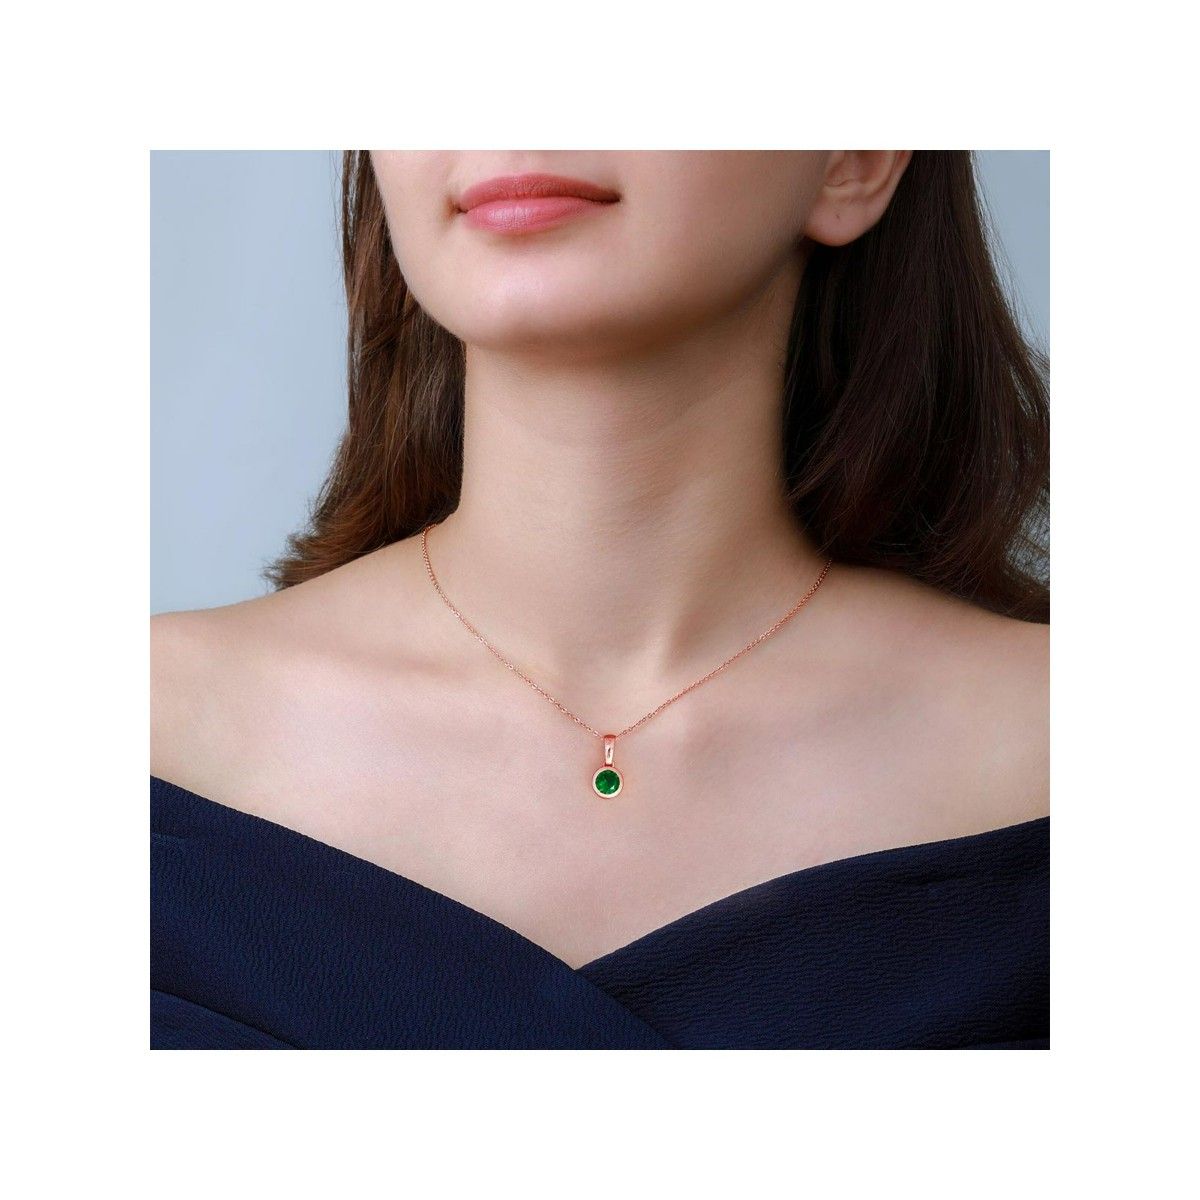 Emerald Necklace / 14k Rose Gold Emerald Solitaire Necklace / Delicate Emerald  Necklace / Dainty Emerald / Green Emerald Necklace / May - Etsy